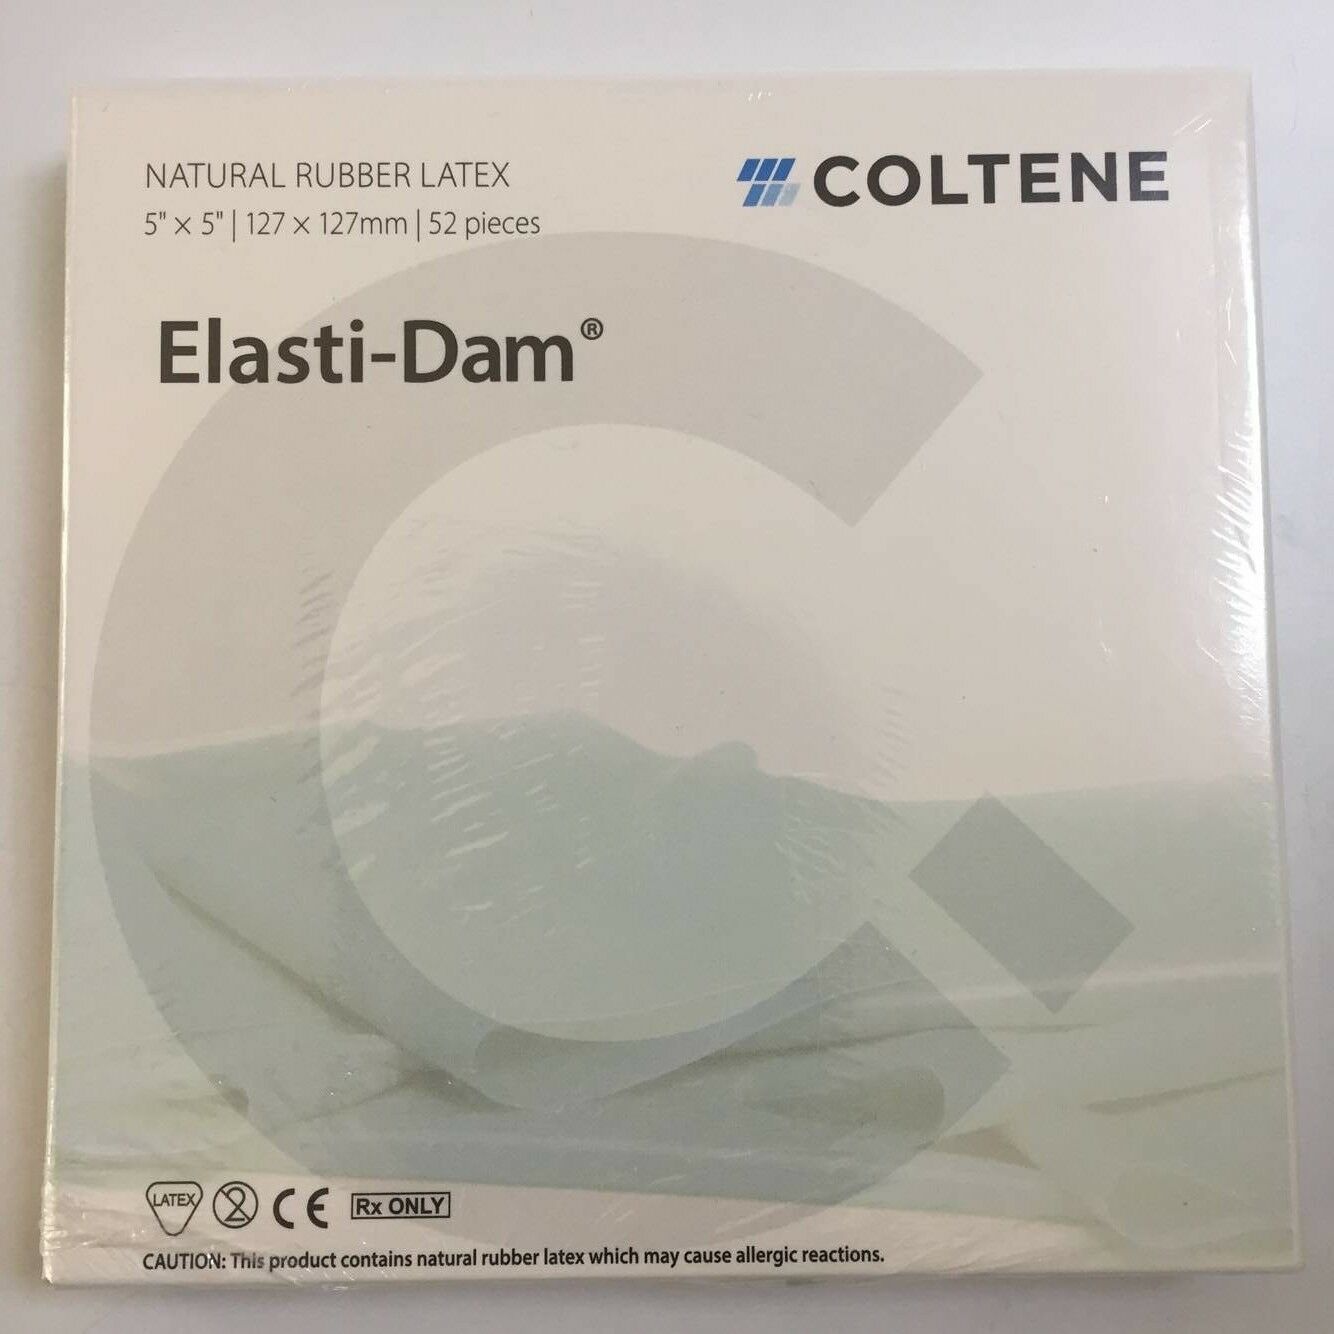 dental-rubber-dam-template-punch-hole-ss-natural-latex-elastic-coltene